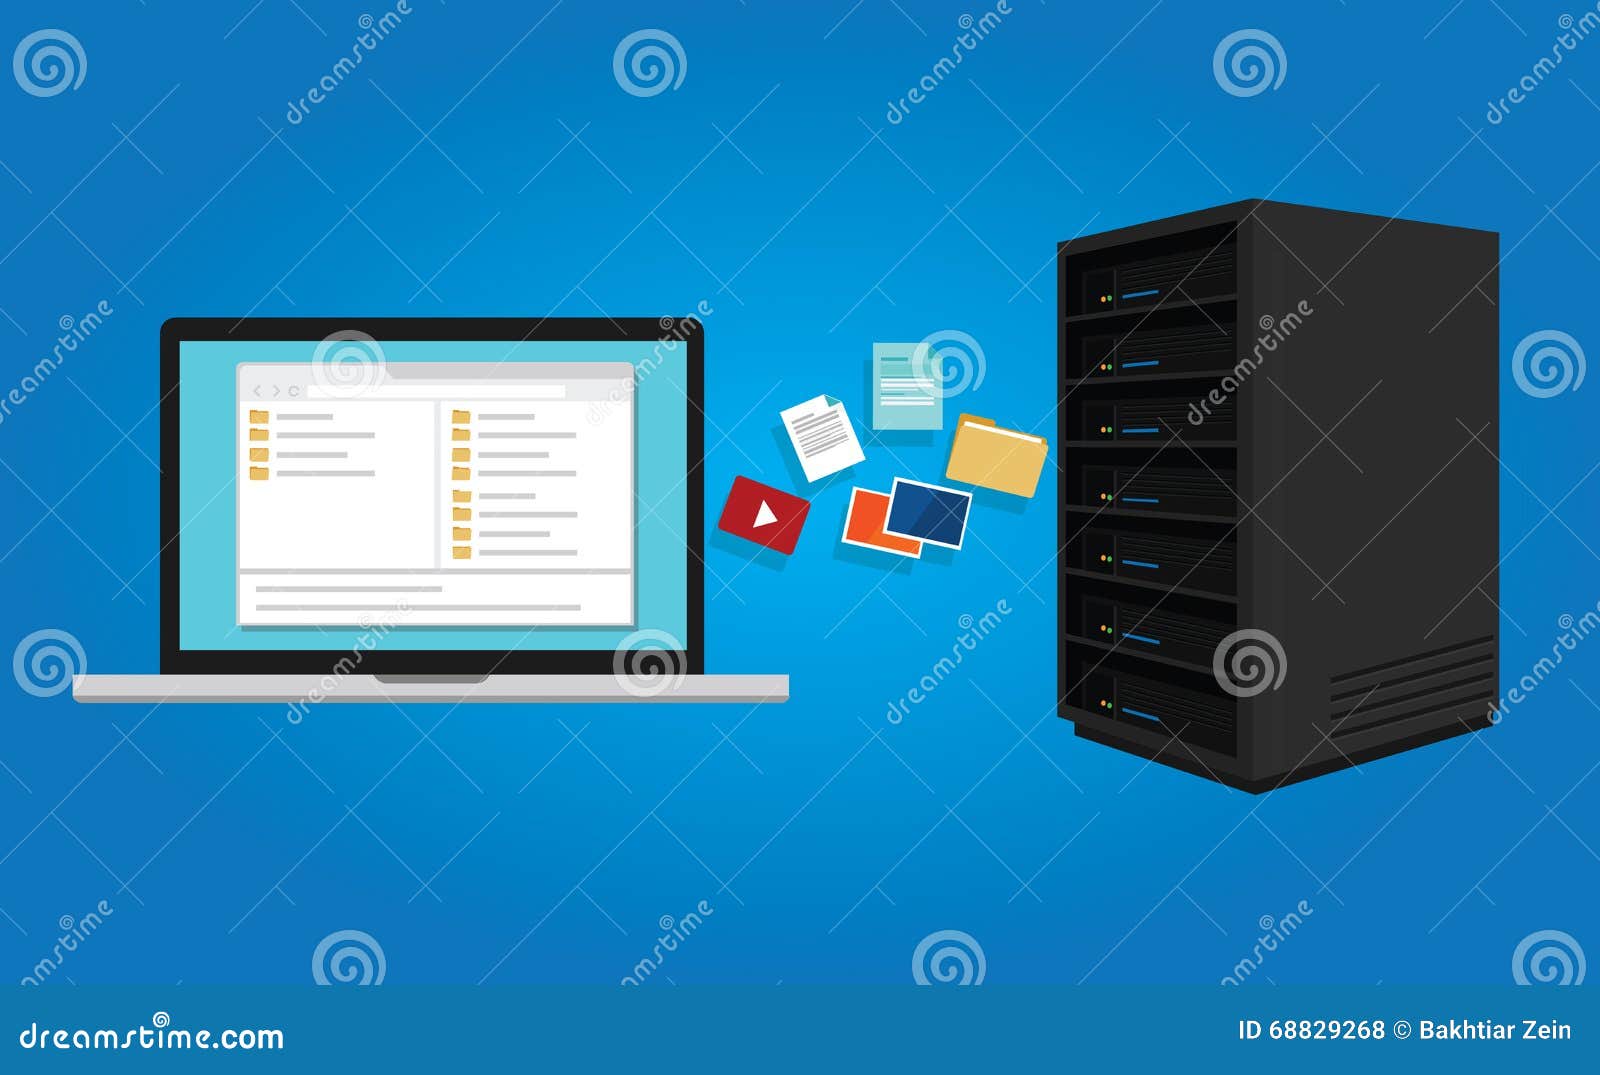 ftp file transfer protocol copy document data from computer laptop to server icon  